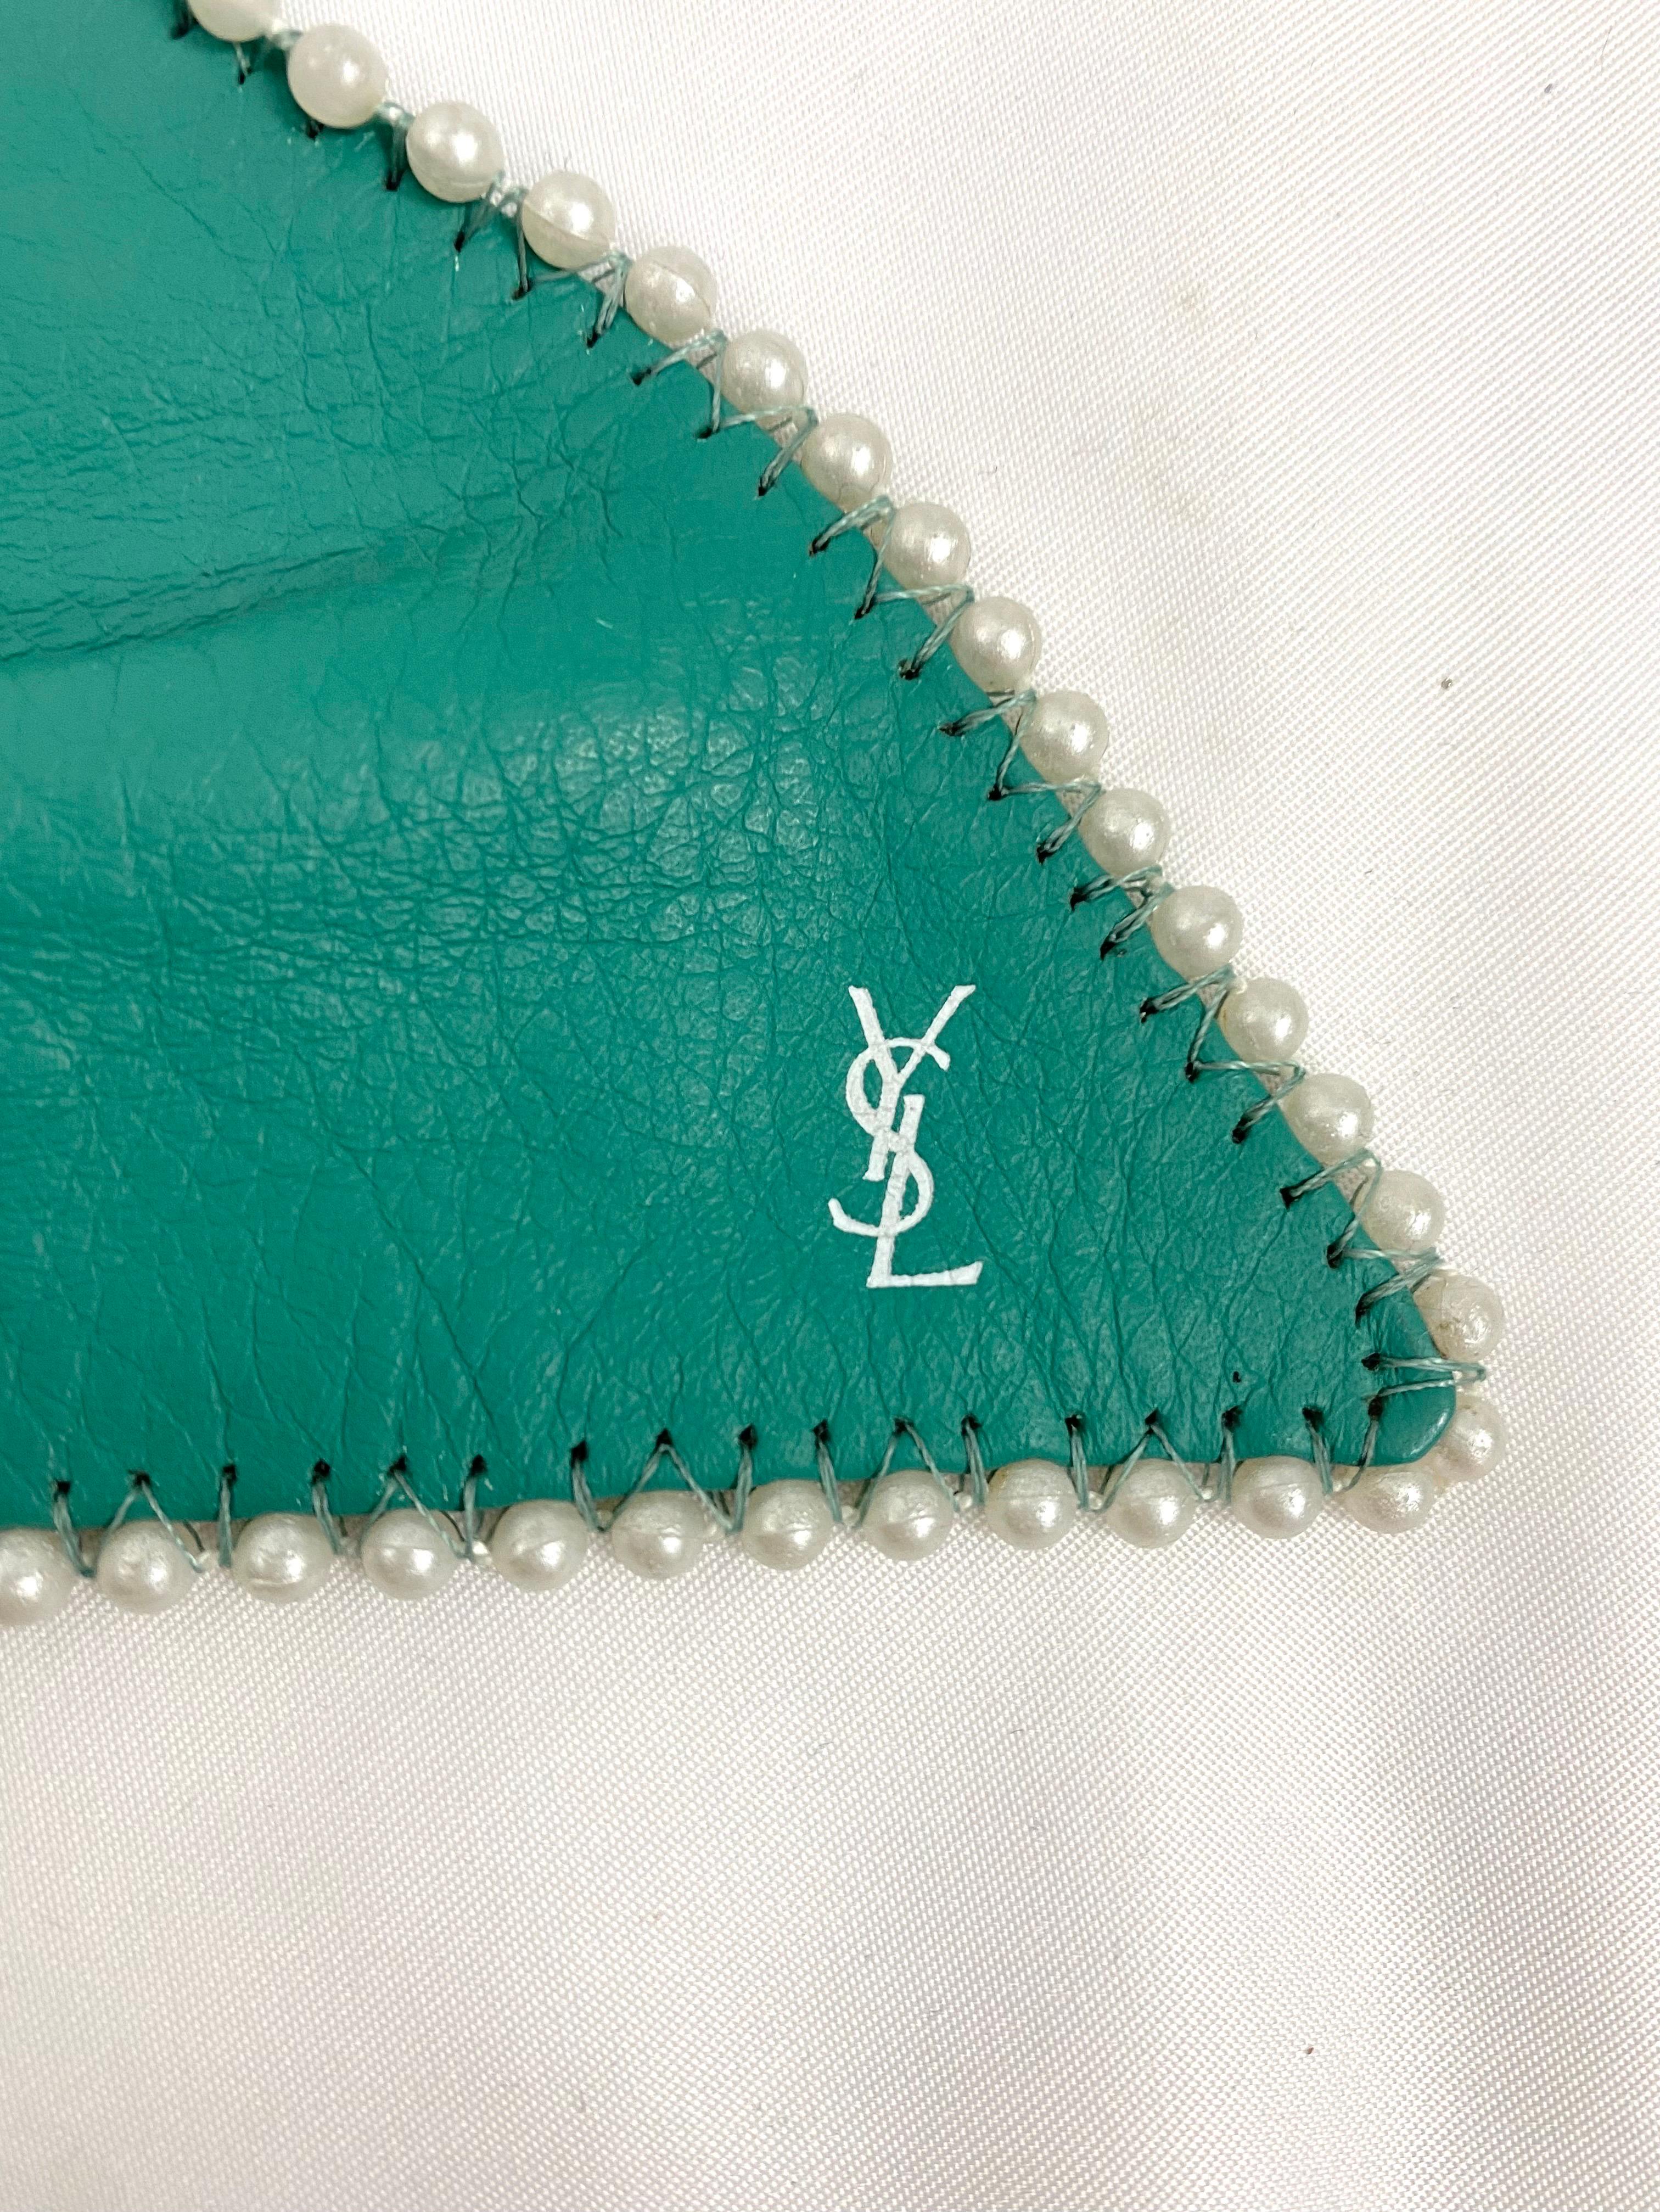 Vintage Yves Saint Laurent turquoise leather belt with pearls and pearly buckle 3